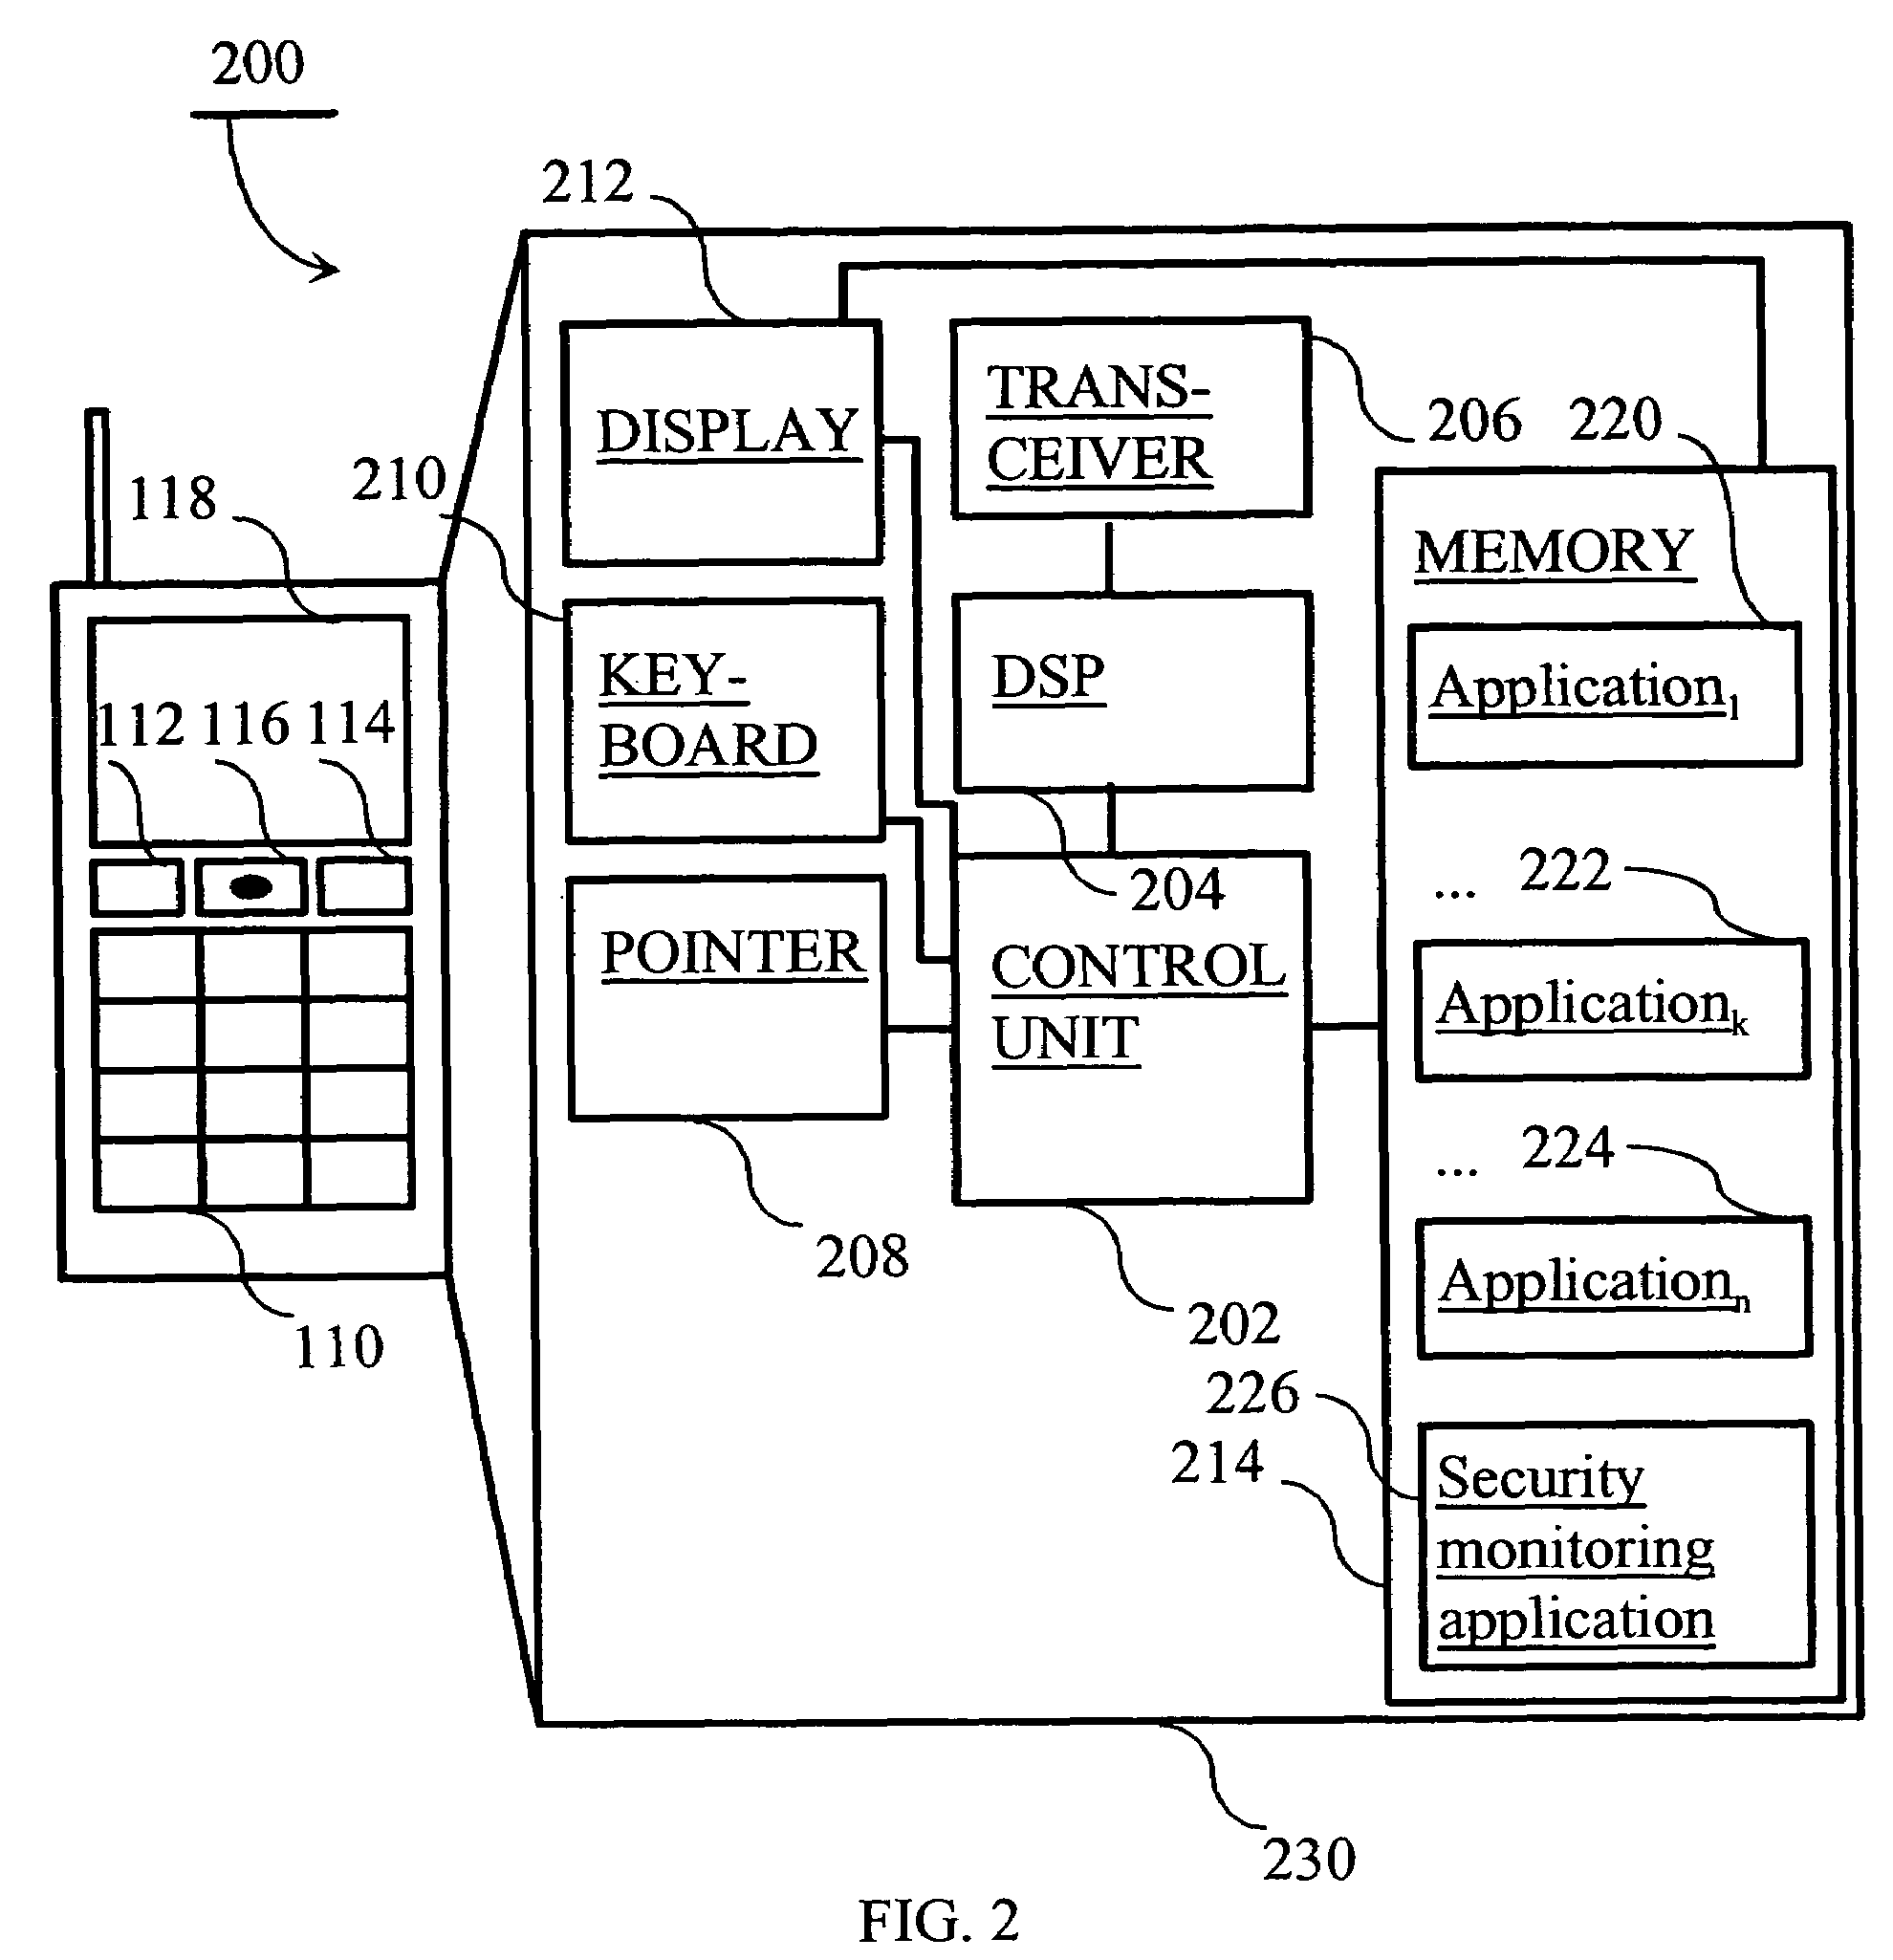 Method for the monitoring of system security in electronic devices